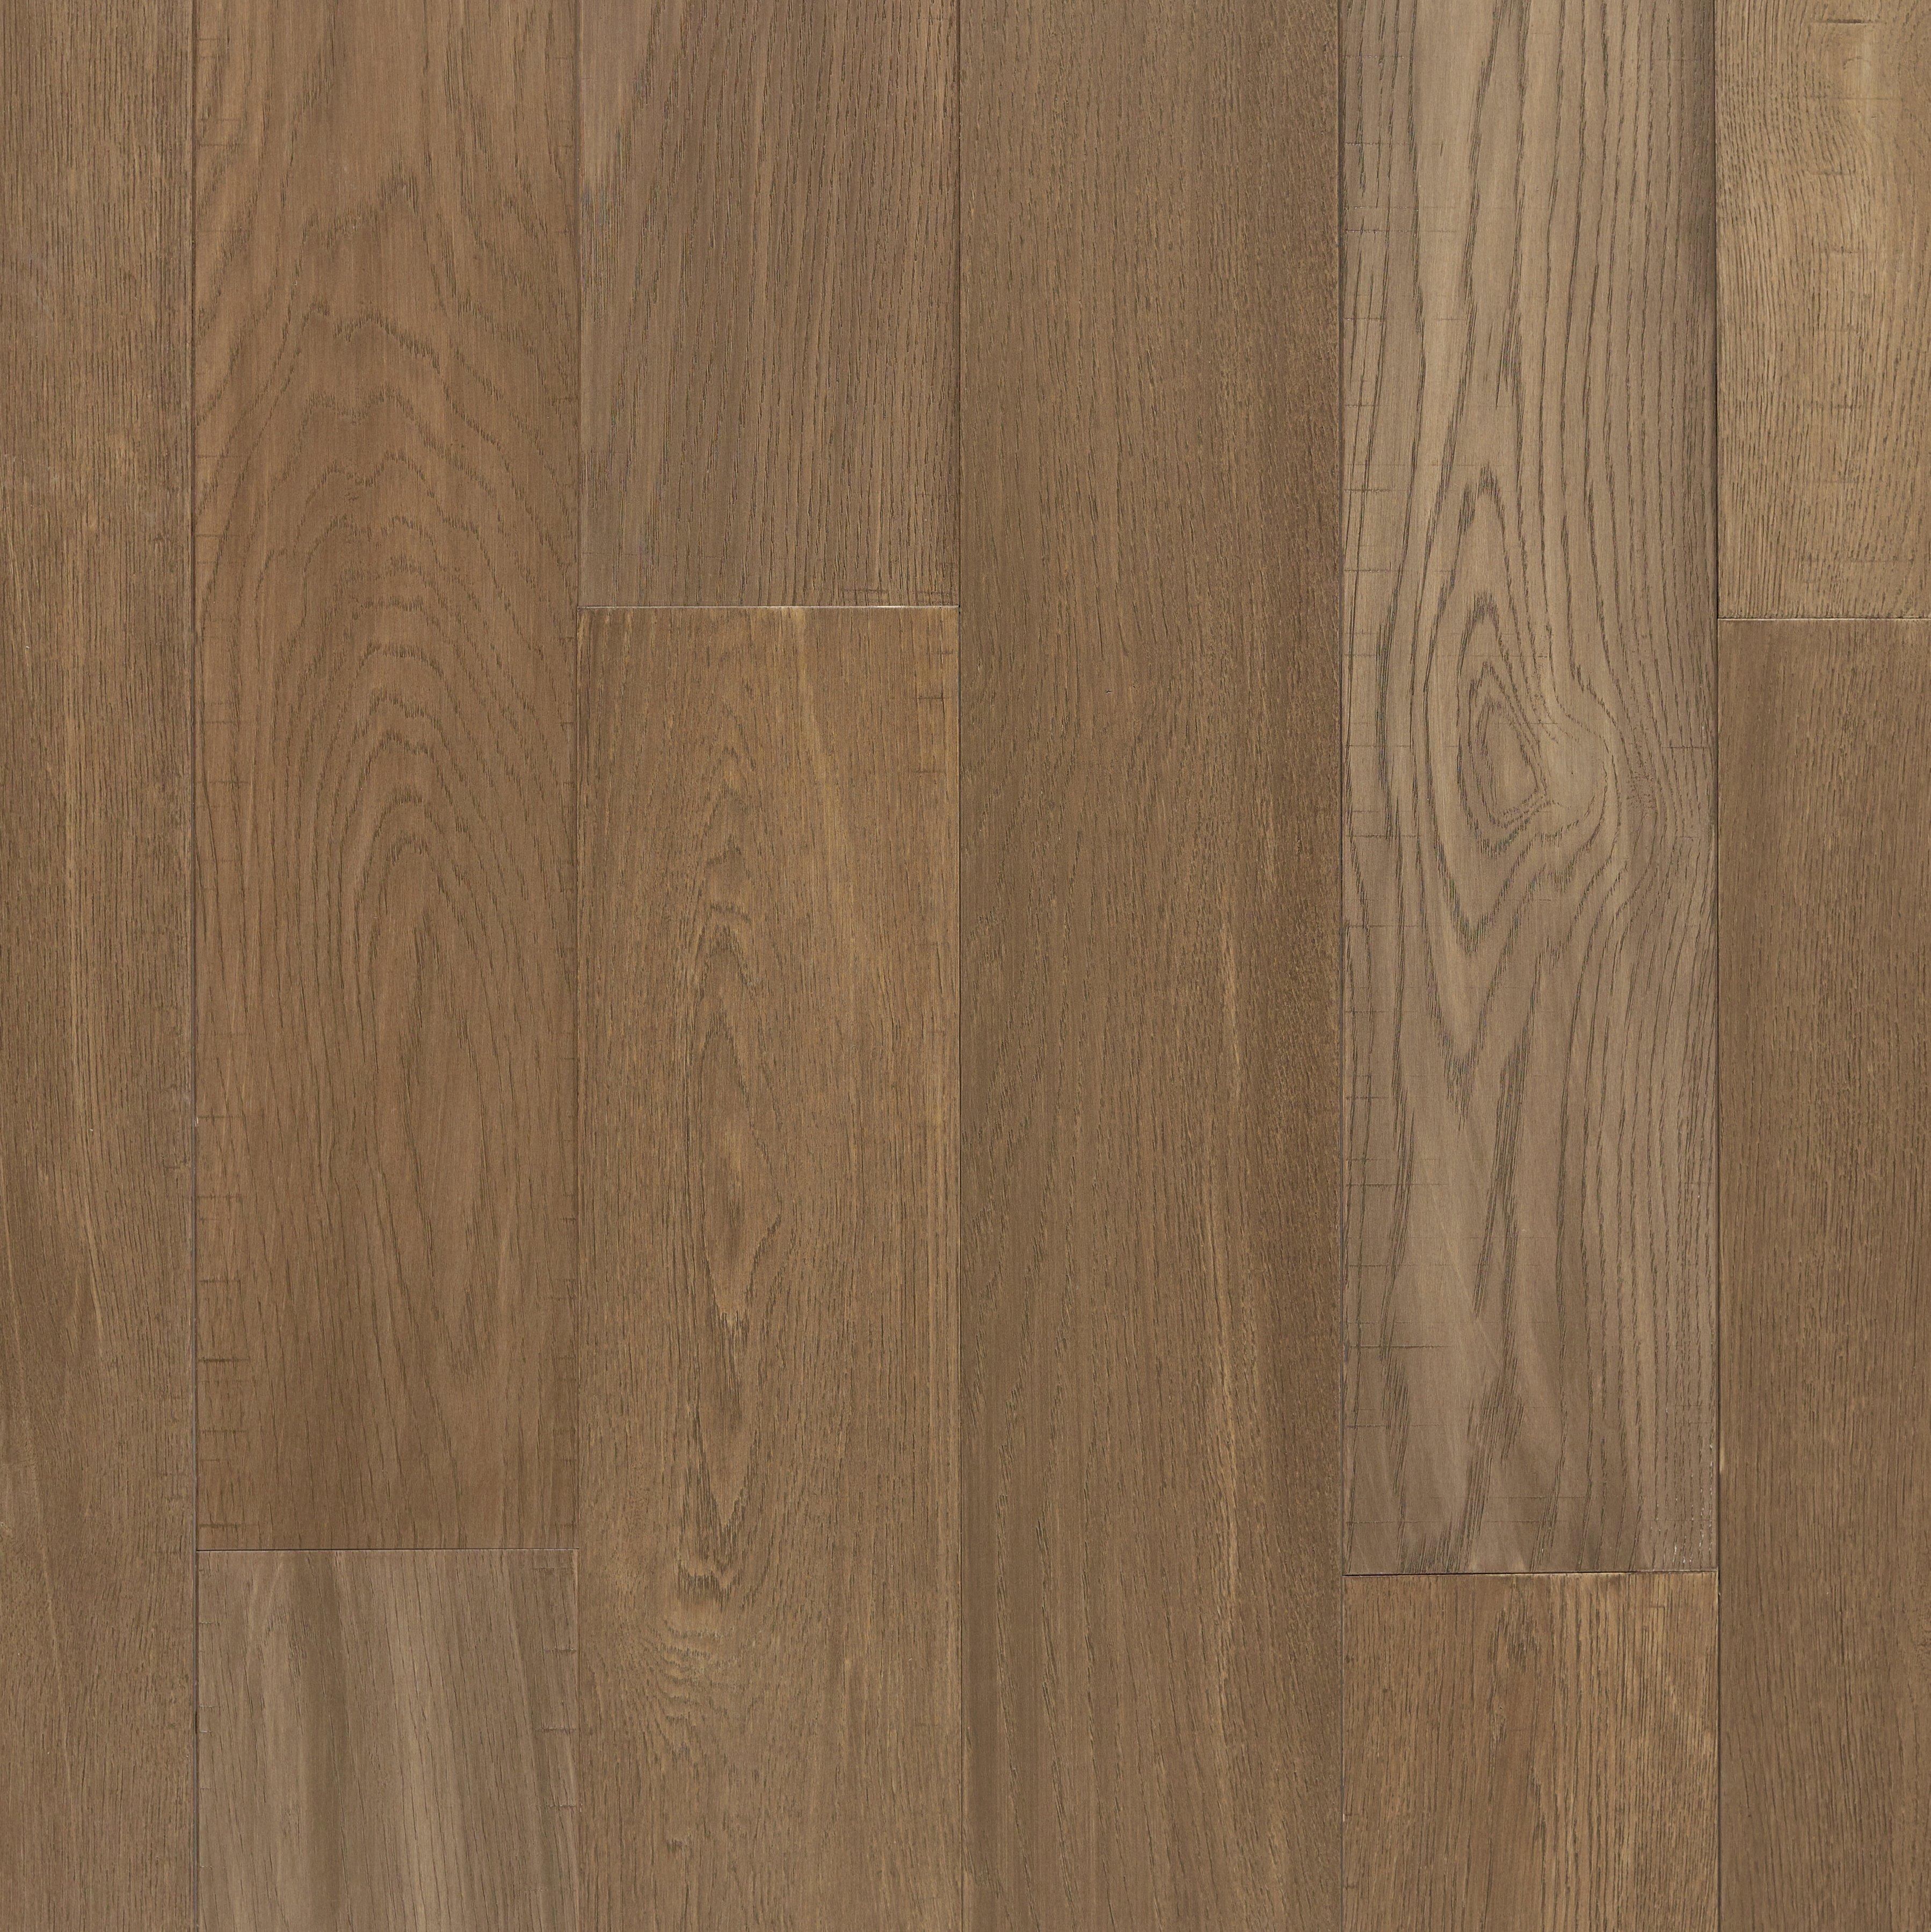 Laval White Oak Wire-Brushed Water Resistant Engineered Hardwood